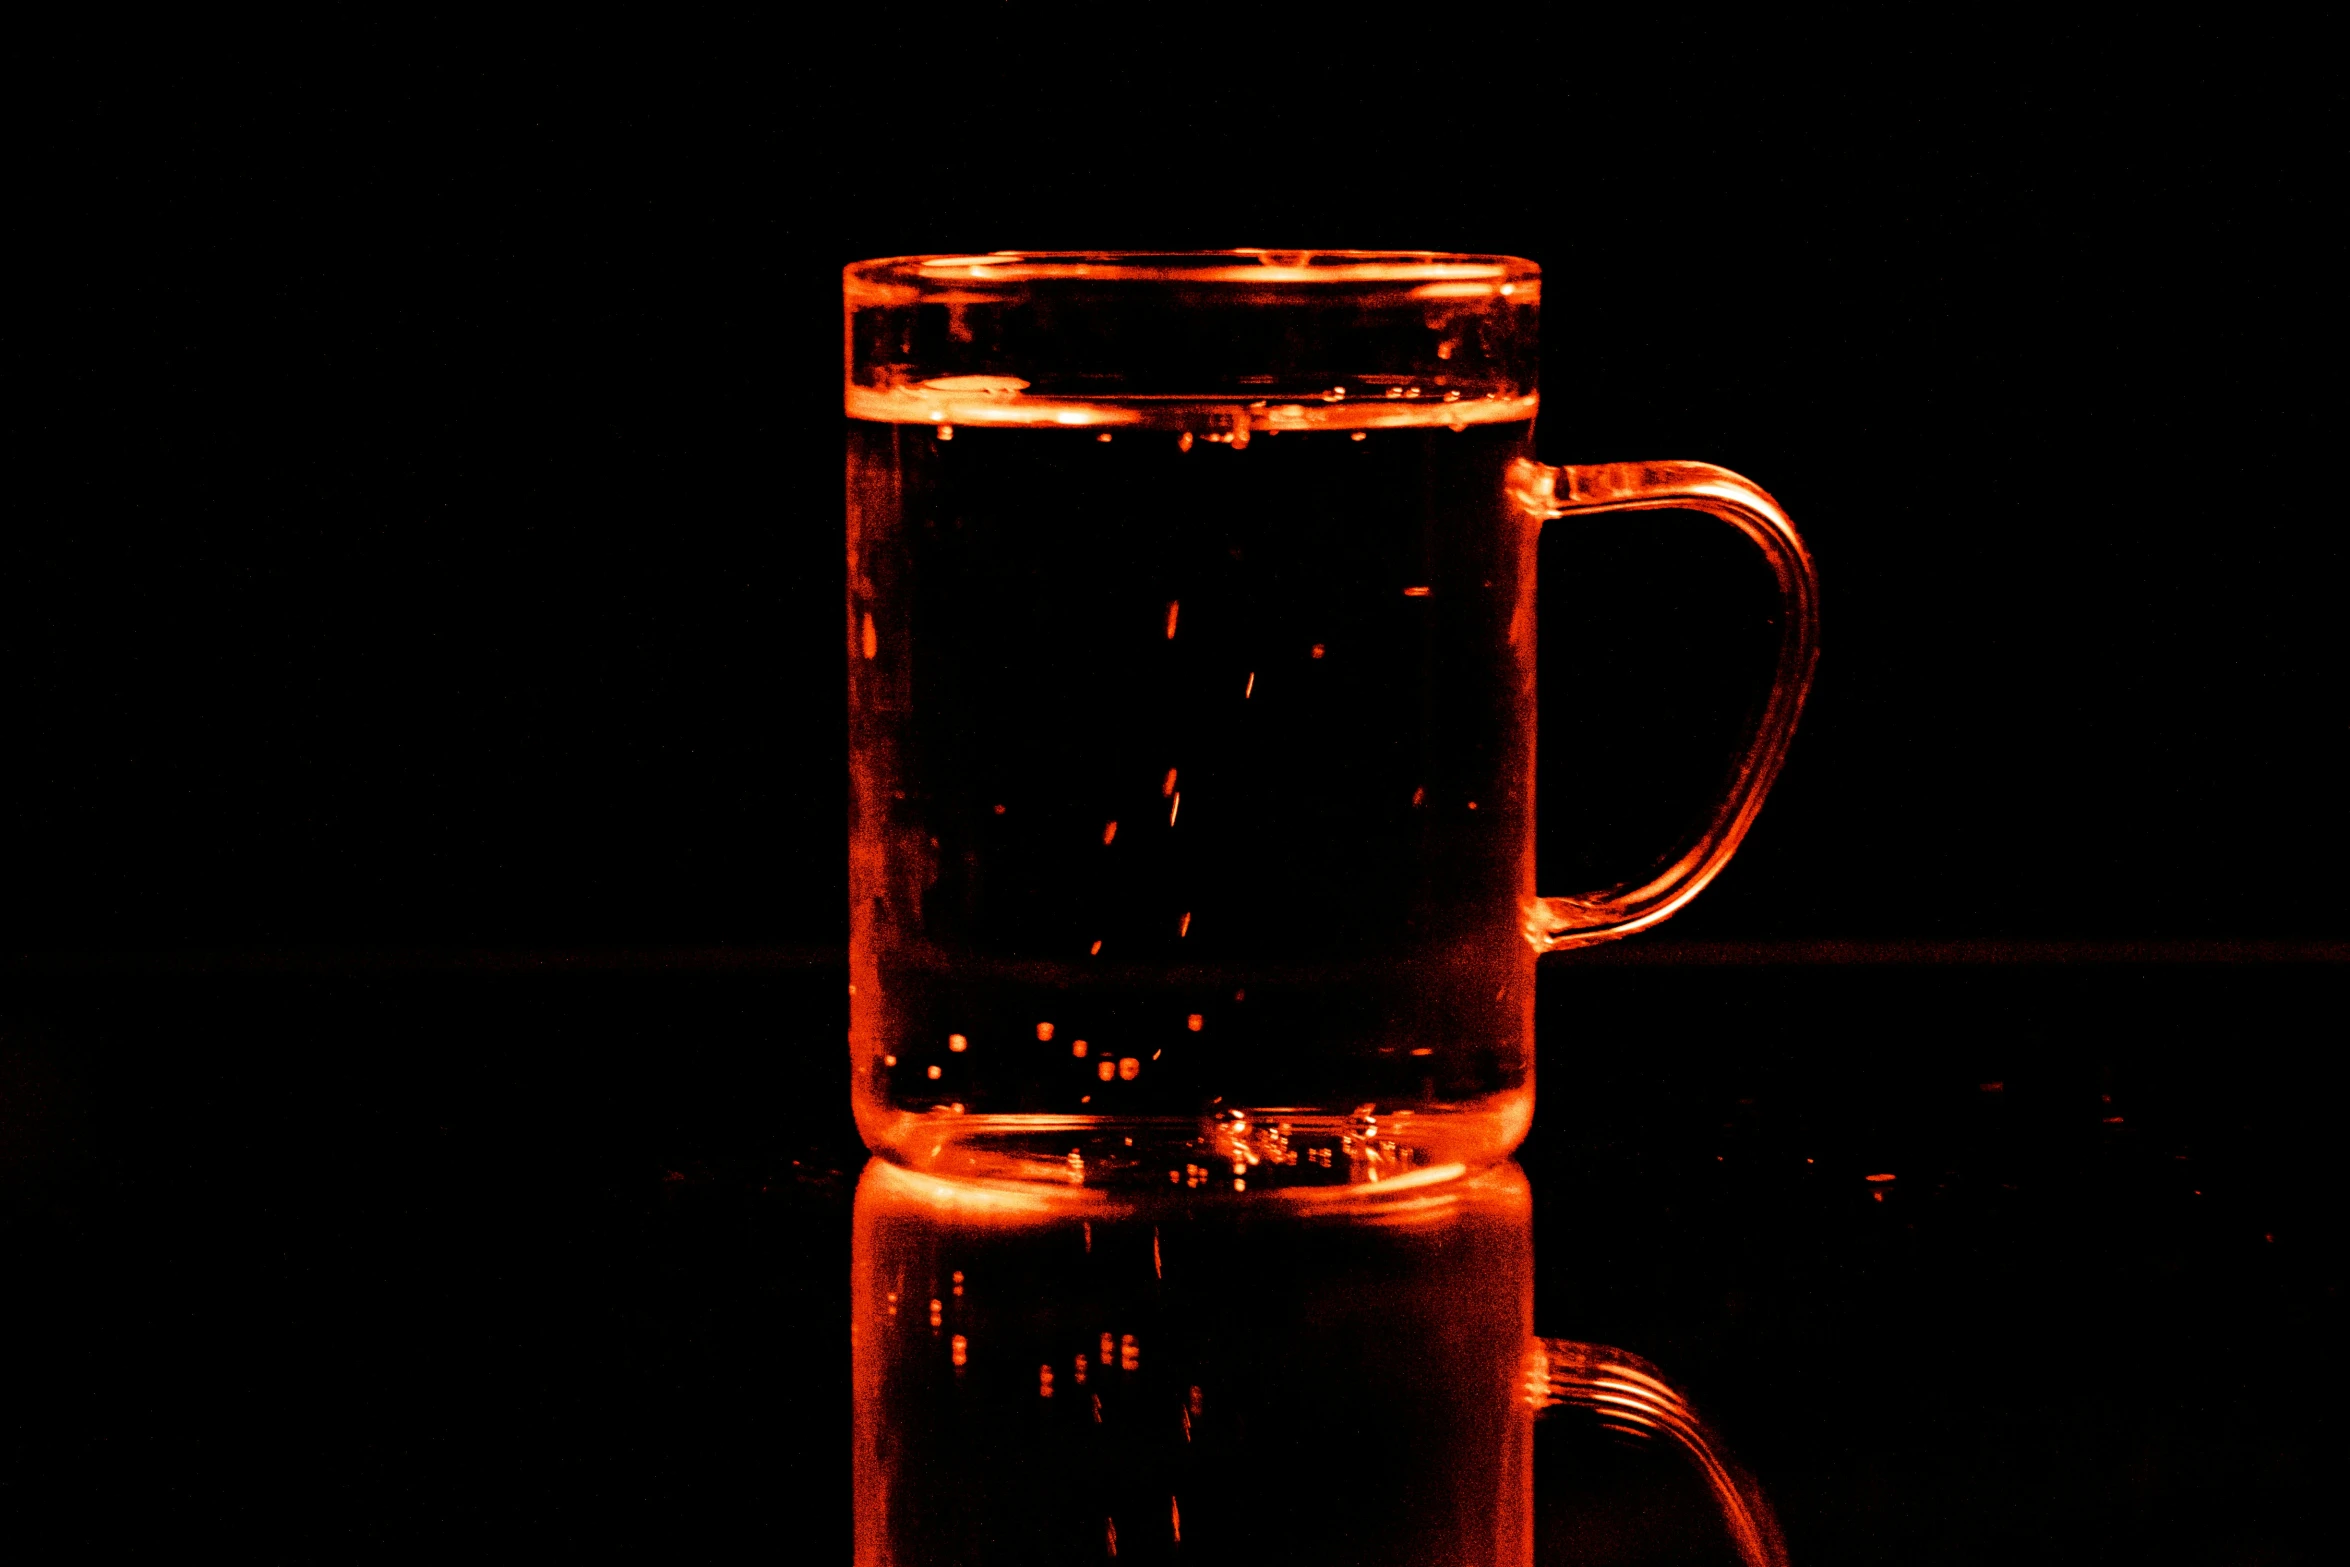 a glass cup on a table is lit up in the dark